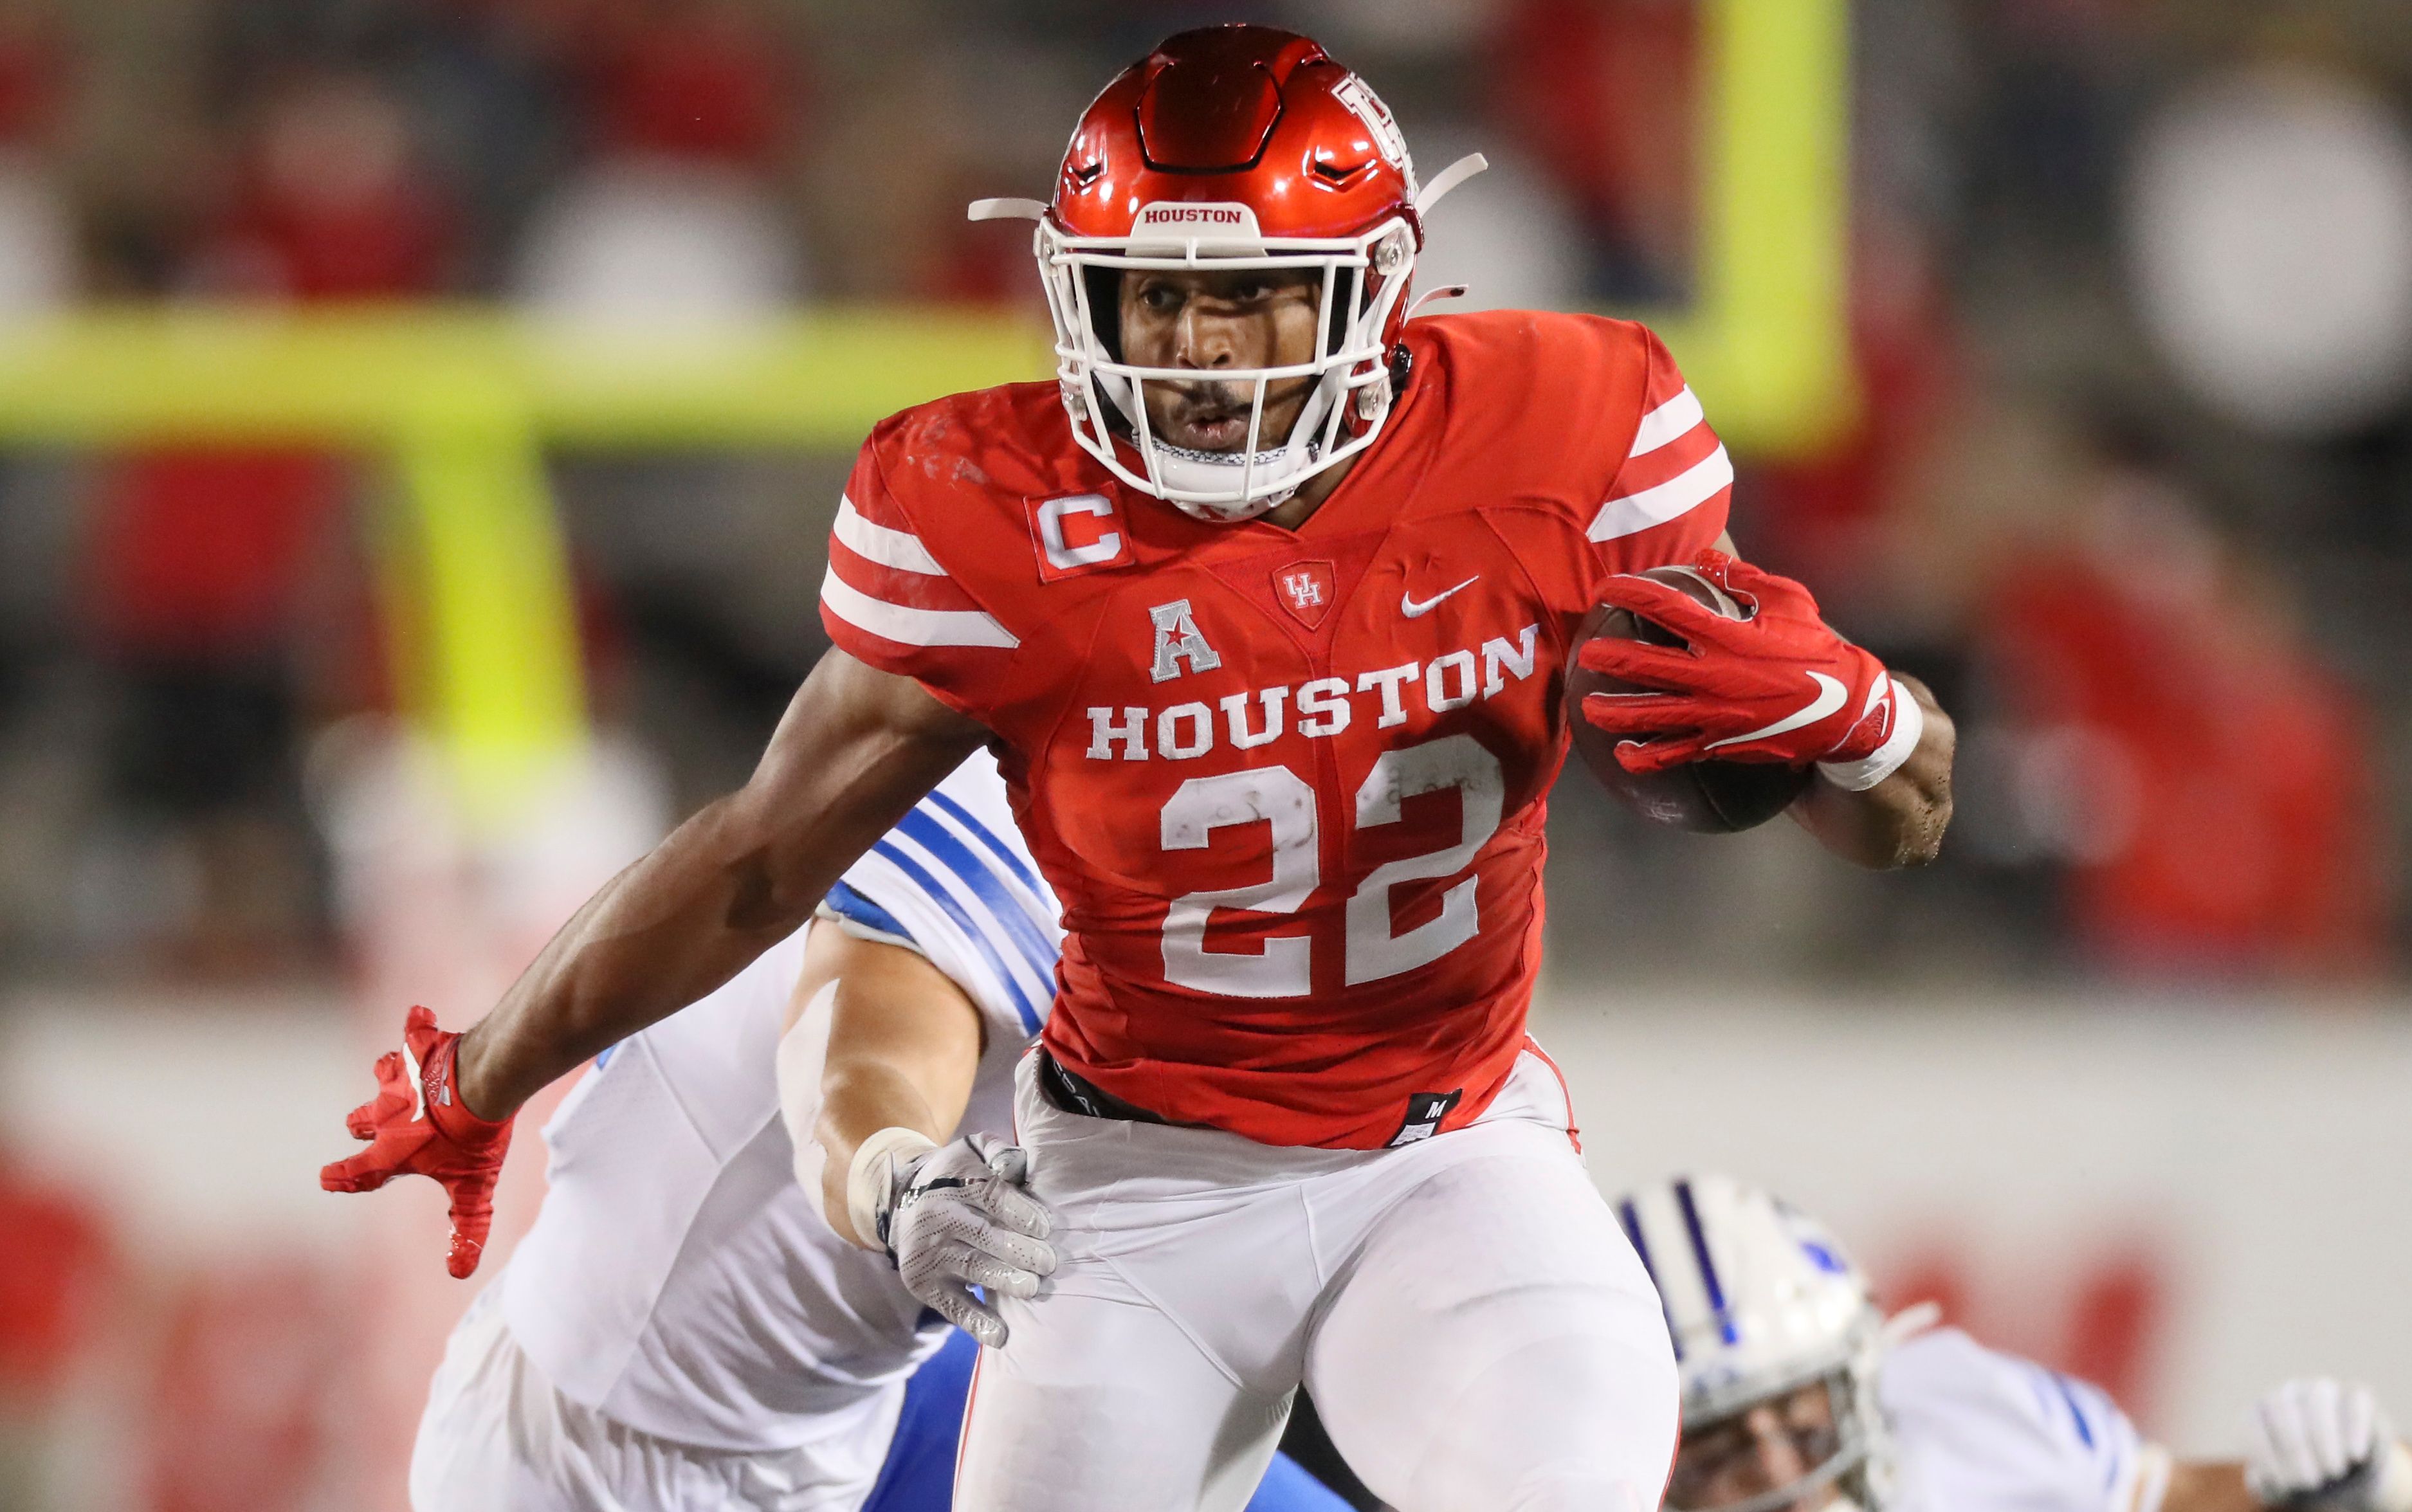 Senior running back Kyle Porter carries the football and tries to power through the grip of a BYU defender during a game at TDECU Stadium in the 2020 season. | Courtesy of UH athletics